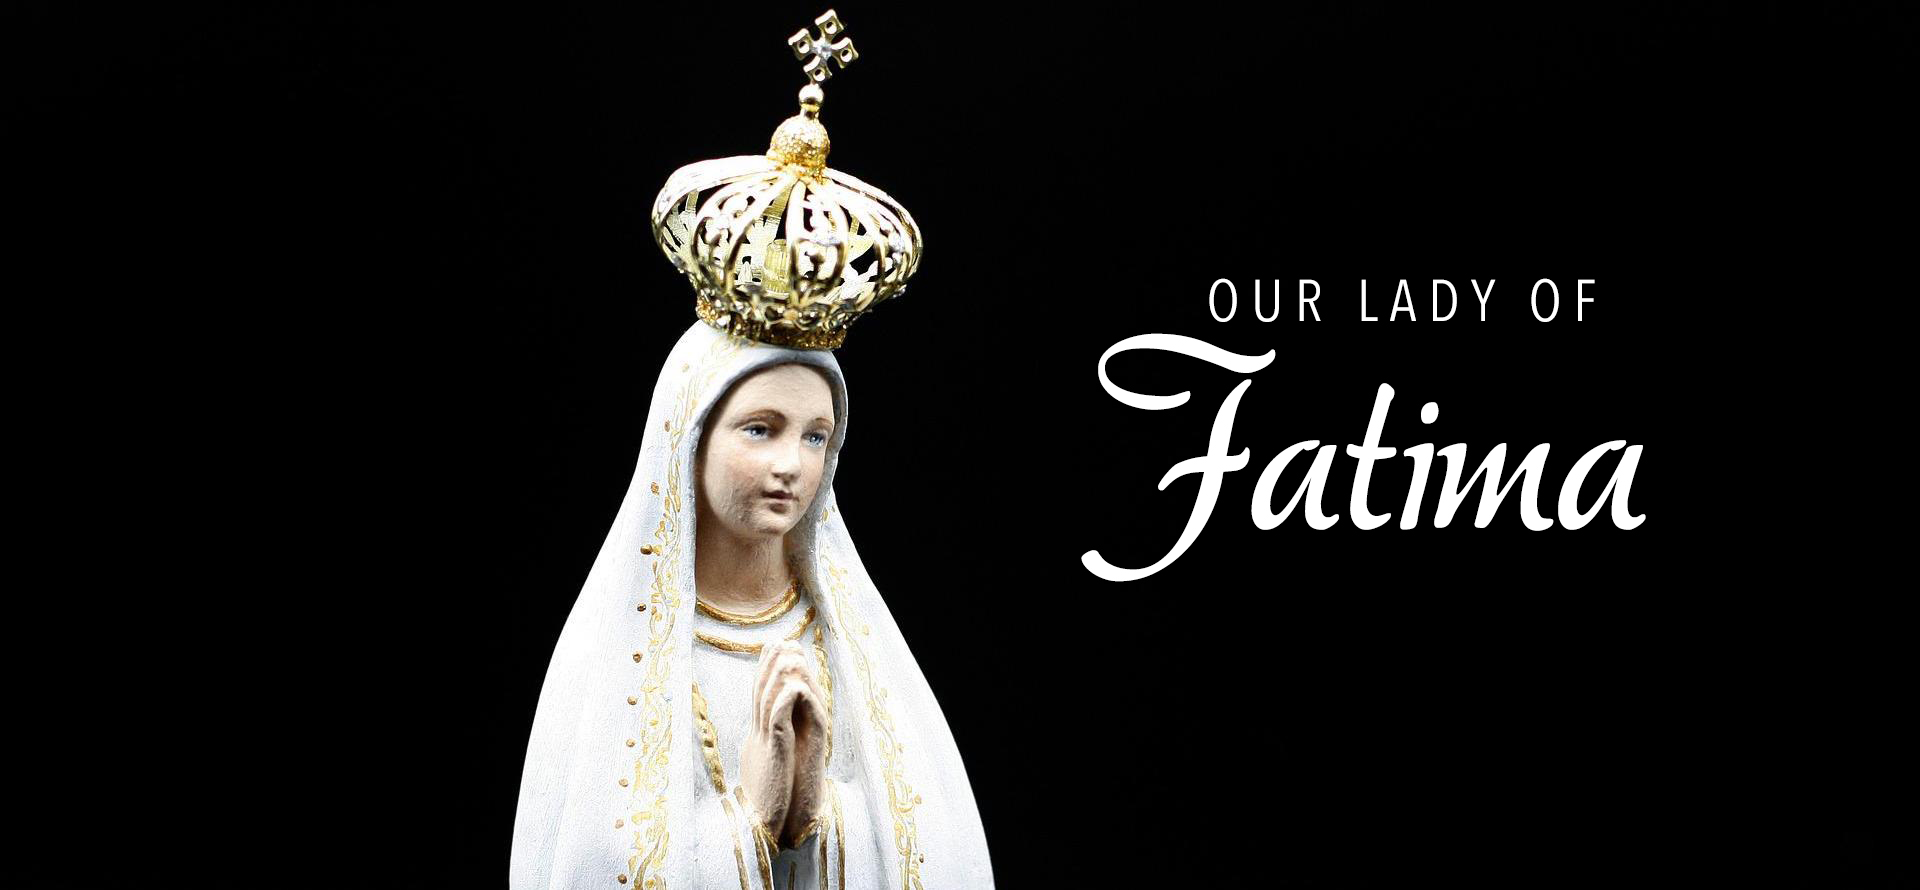 The story of Our Lady of Fatima - Diocese of Saint Cloud